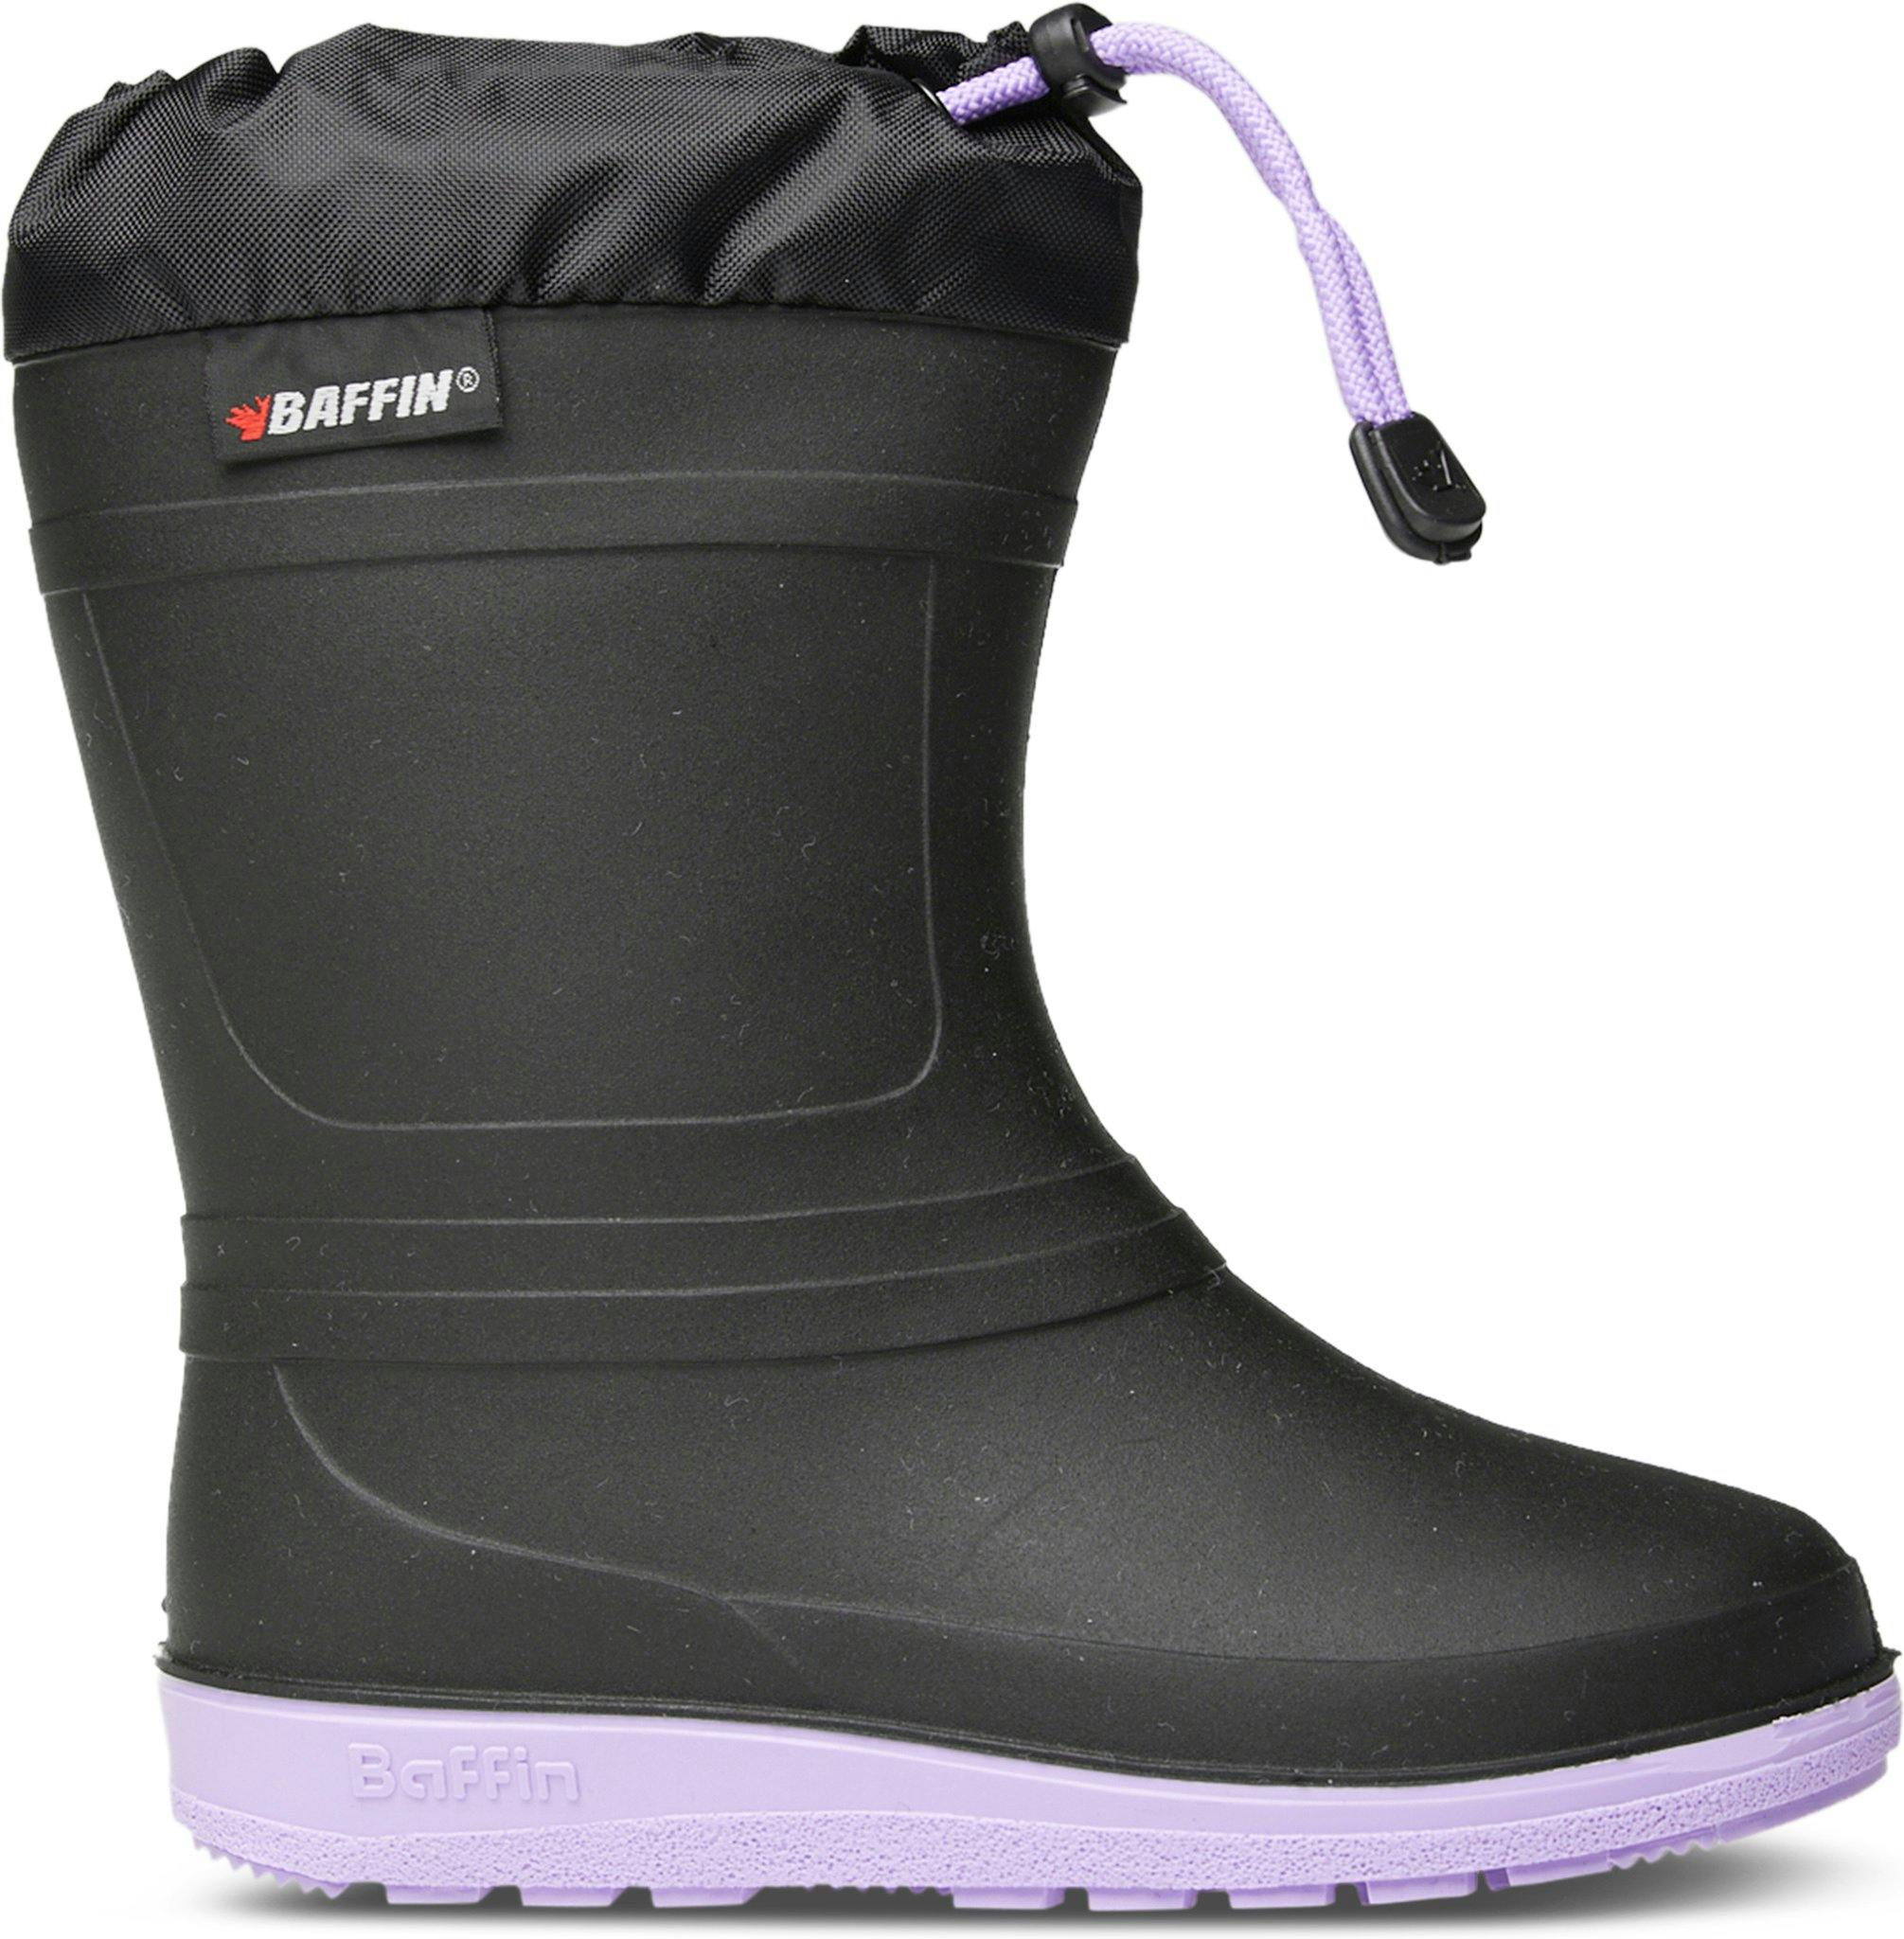 Product image for Ice Castle Boots - Kid's